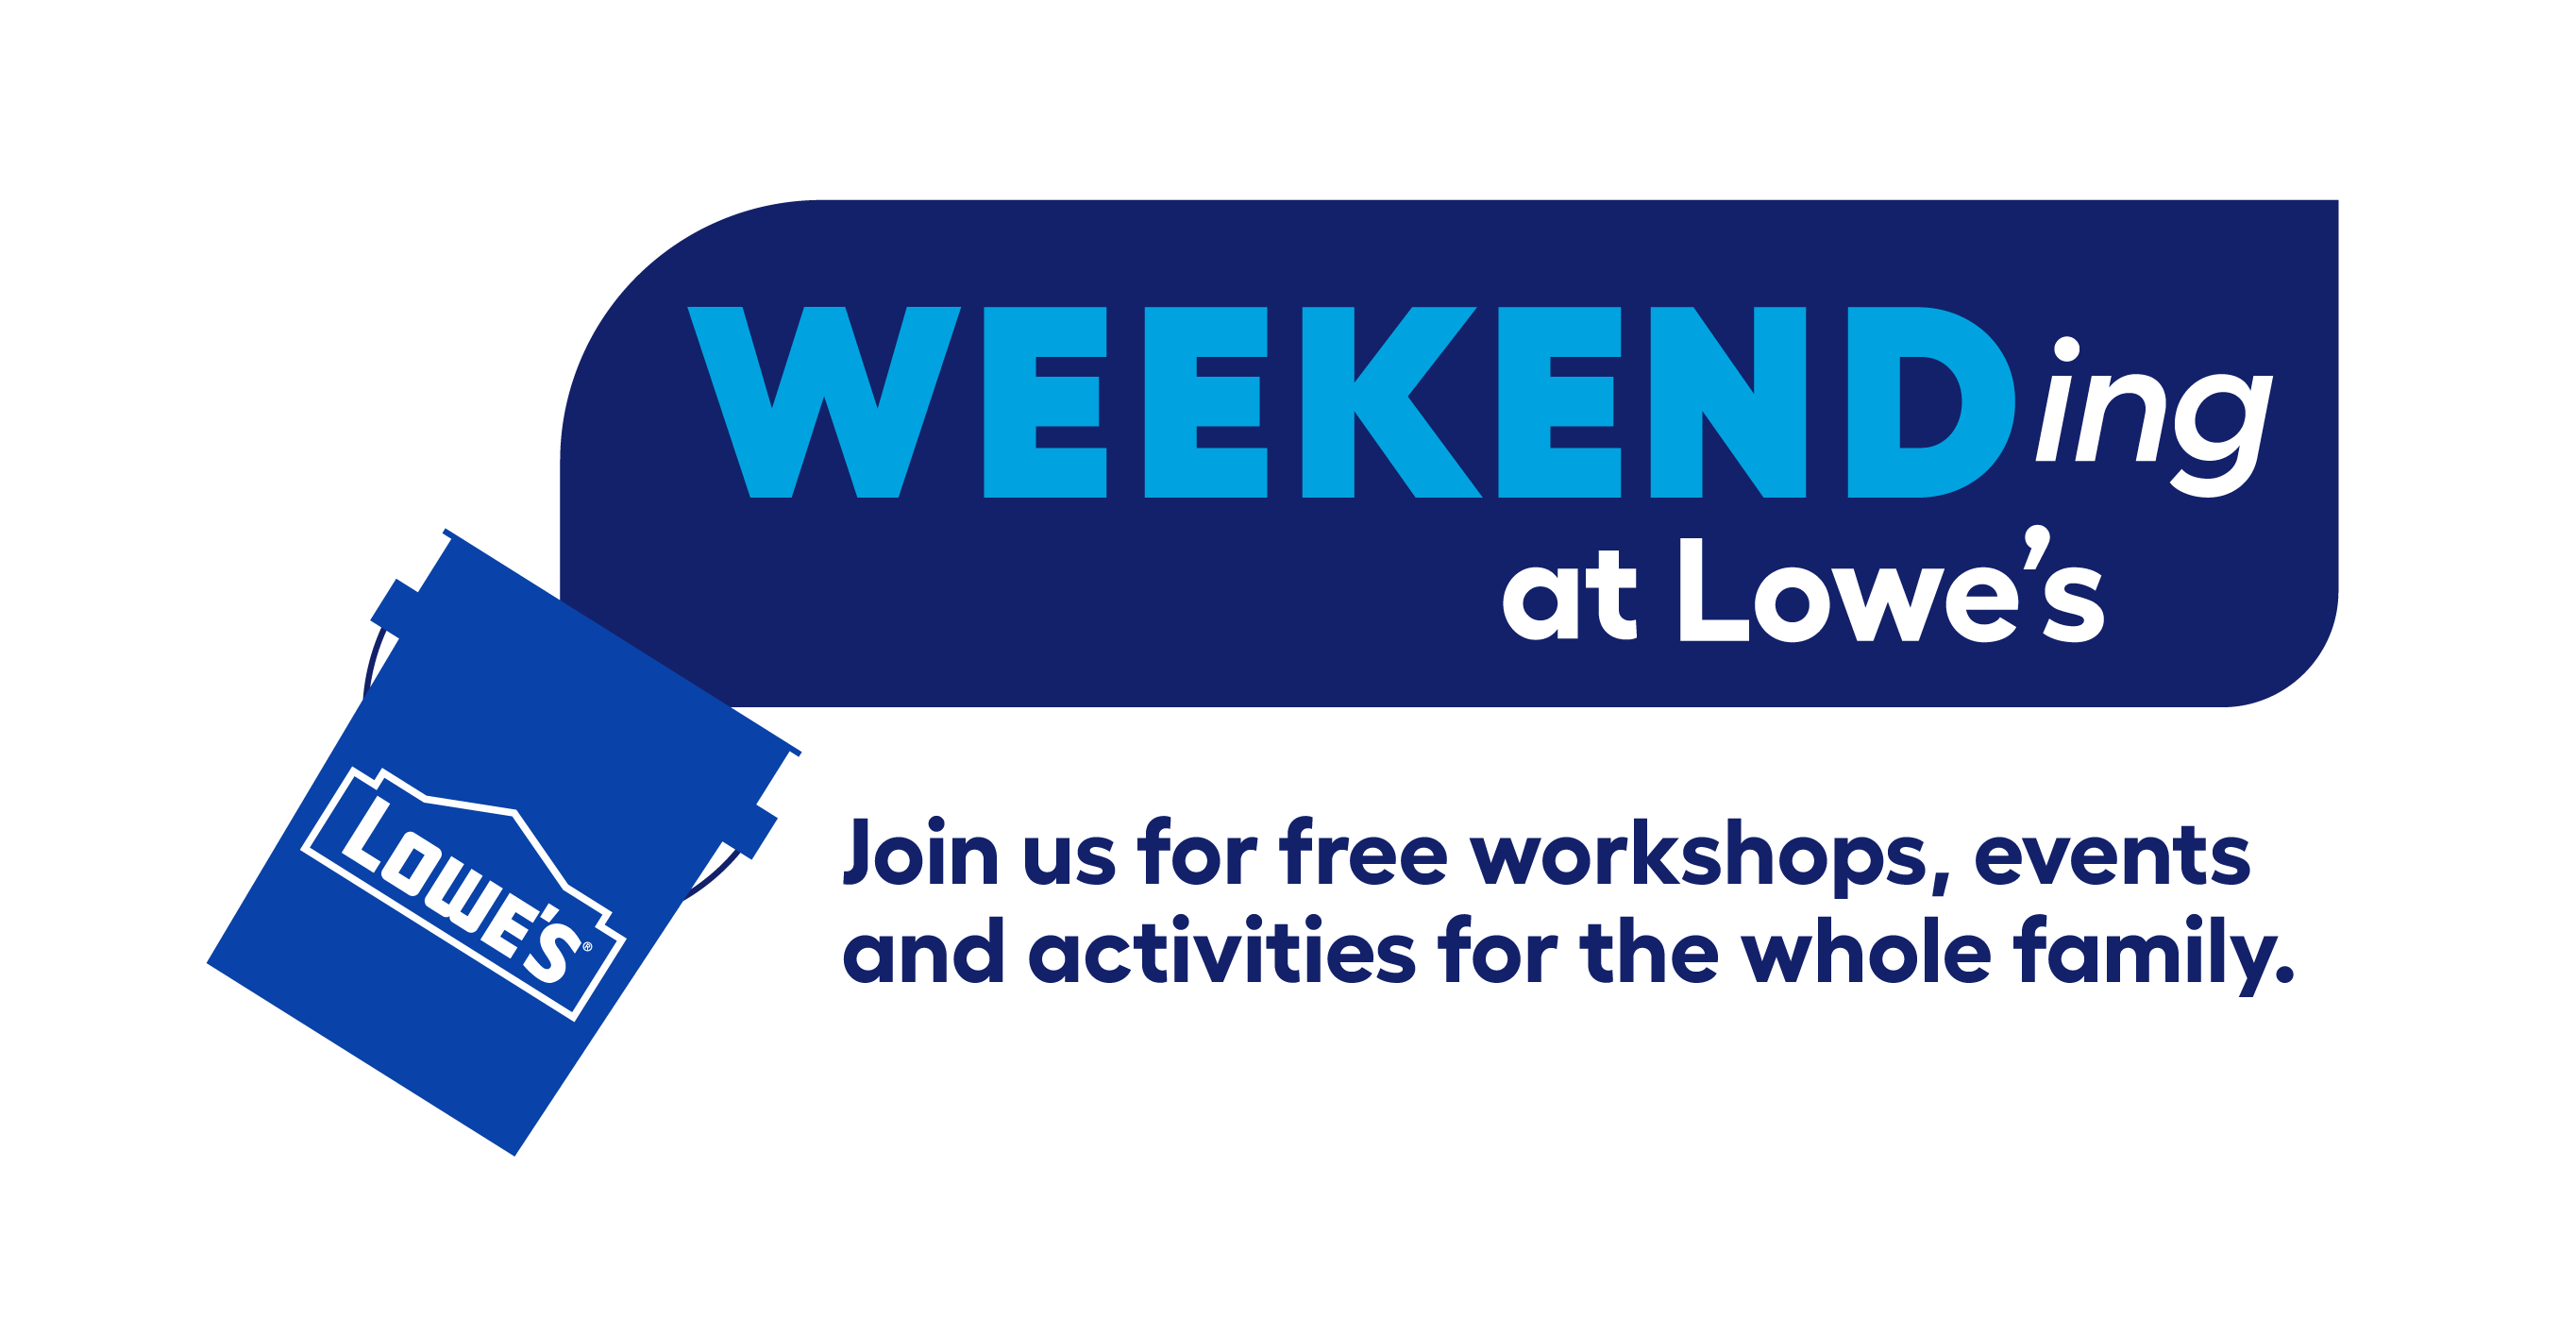 Weekending at Lowe's - Local Event